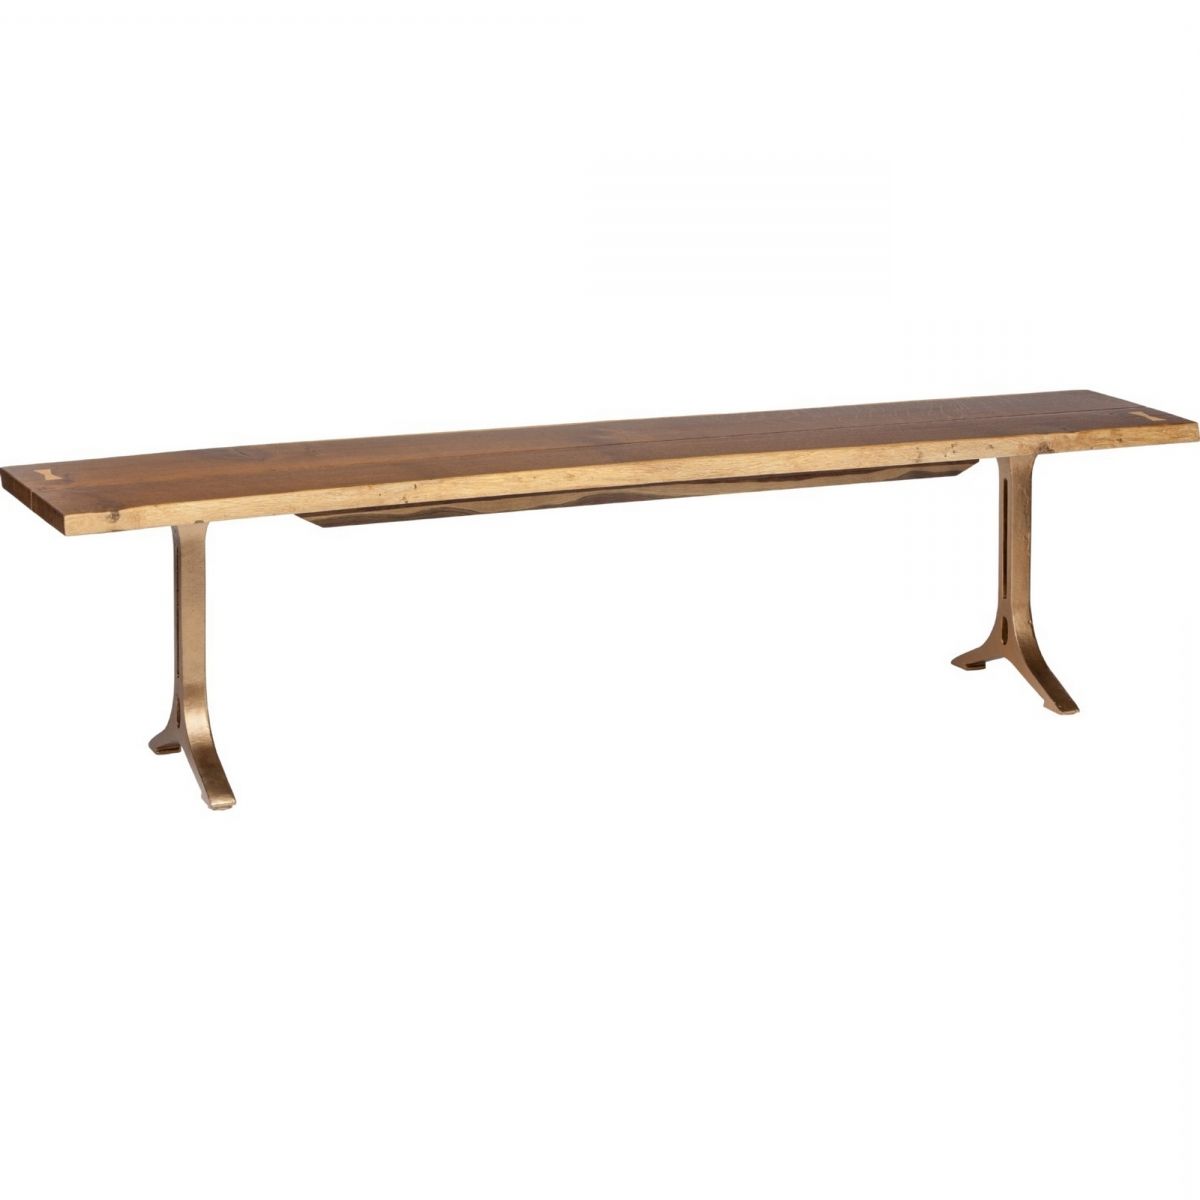 Most Popular Samara Dining Bench In Smoked Oak Bronzed Gilt 71 Intended For Dining Tables In Smoked/seared Oak (View 19 of 25)